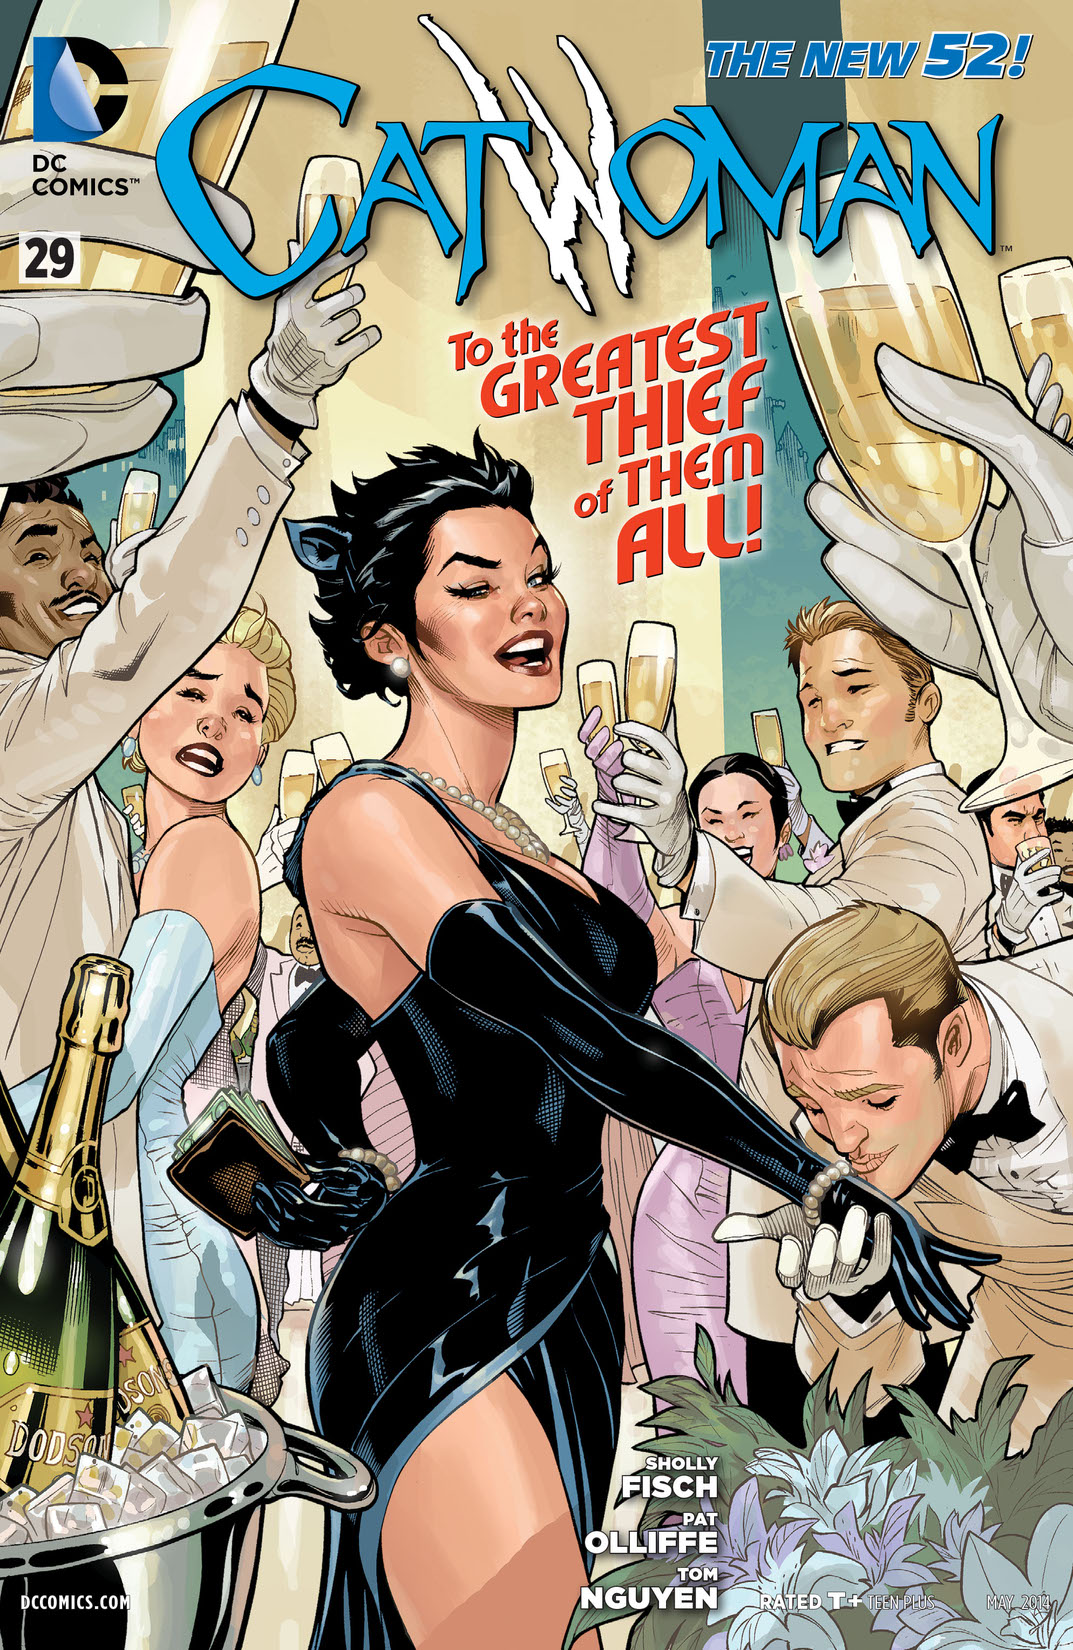 Catwoman (2011-) #29 preview images